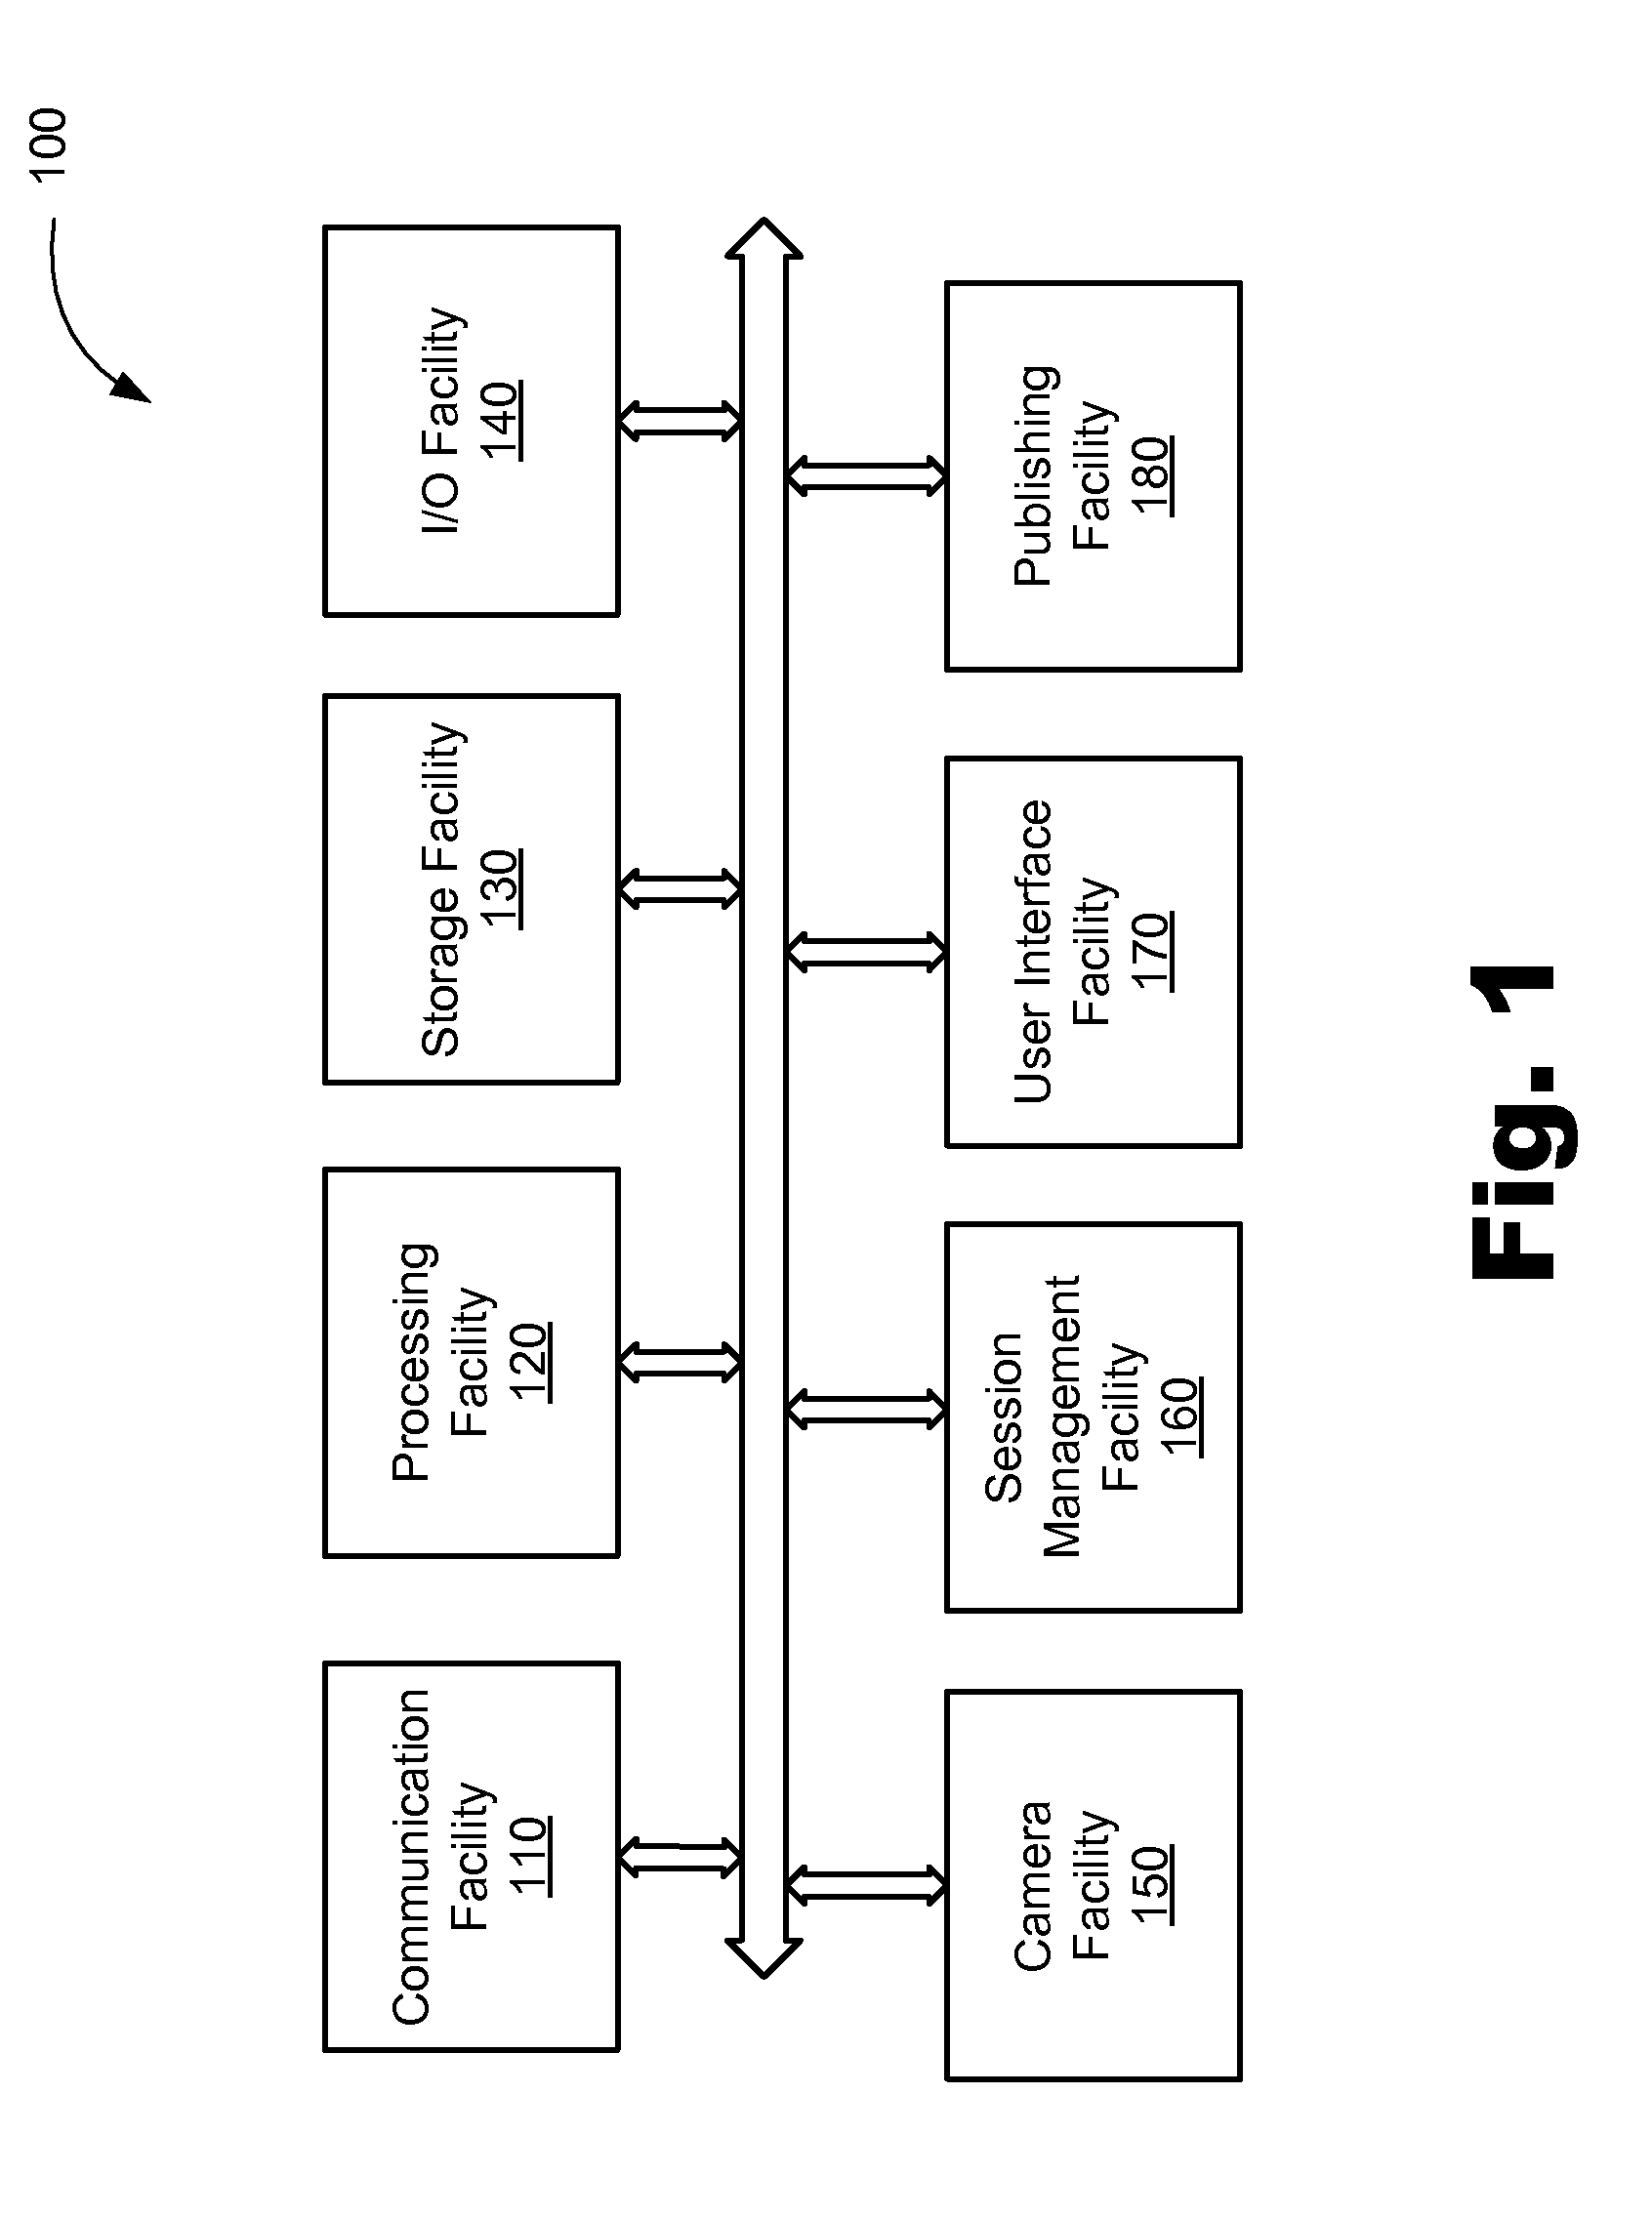 Camera data management and user interface apparatuses, systems, and methods